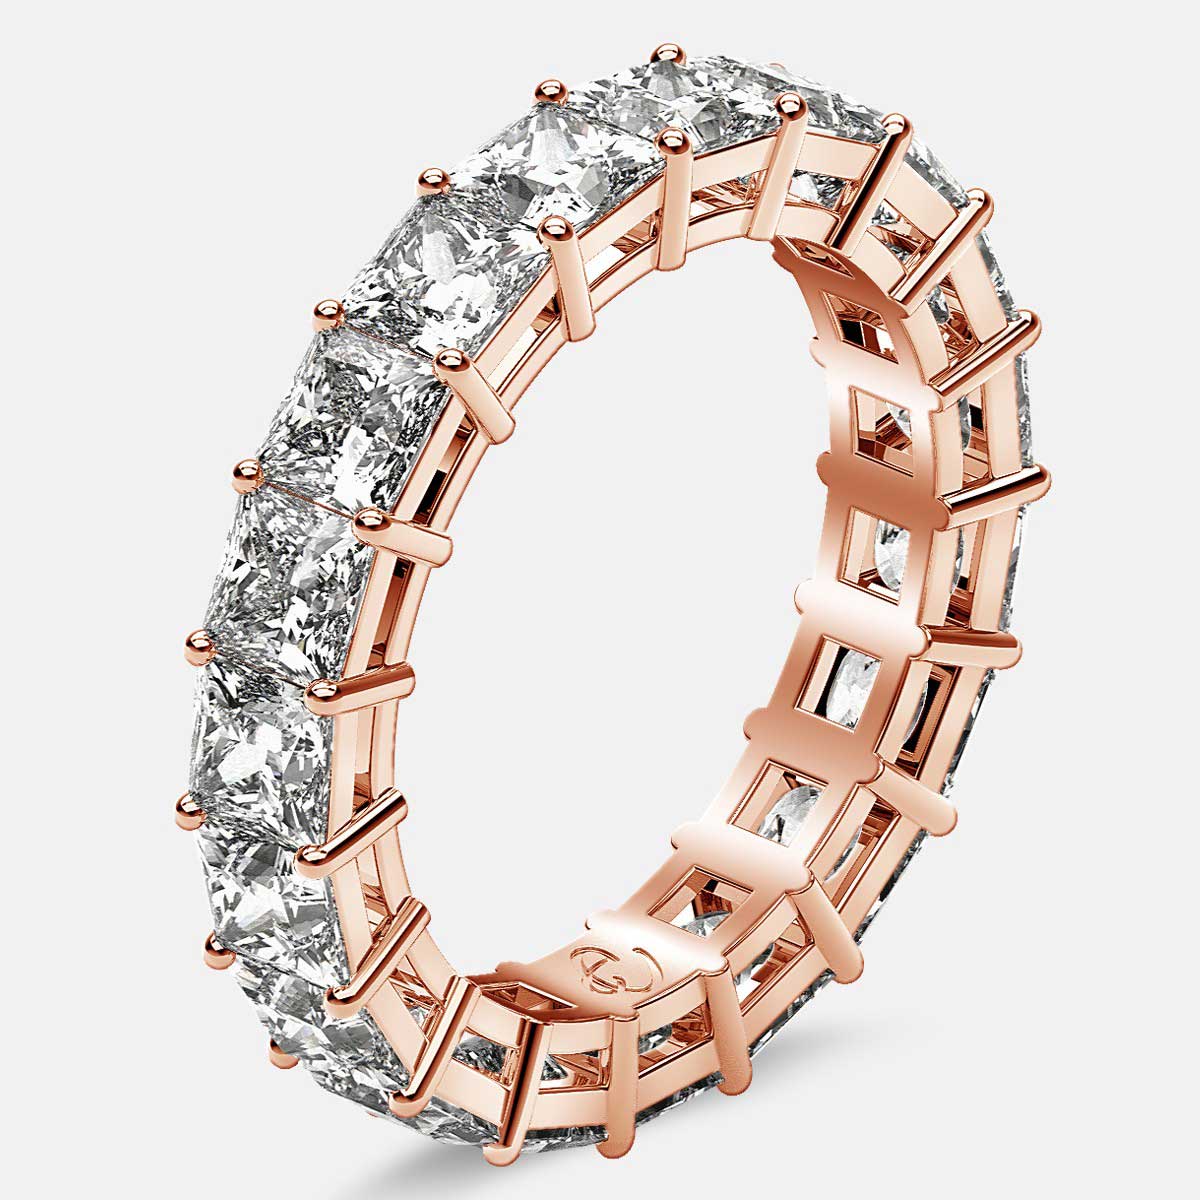 Eternity Ring with Prong Set Princess Cut Diamonds in 18k Rose Gold